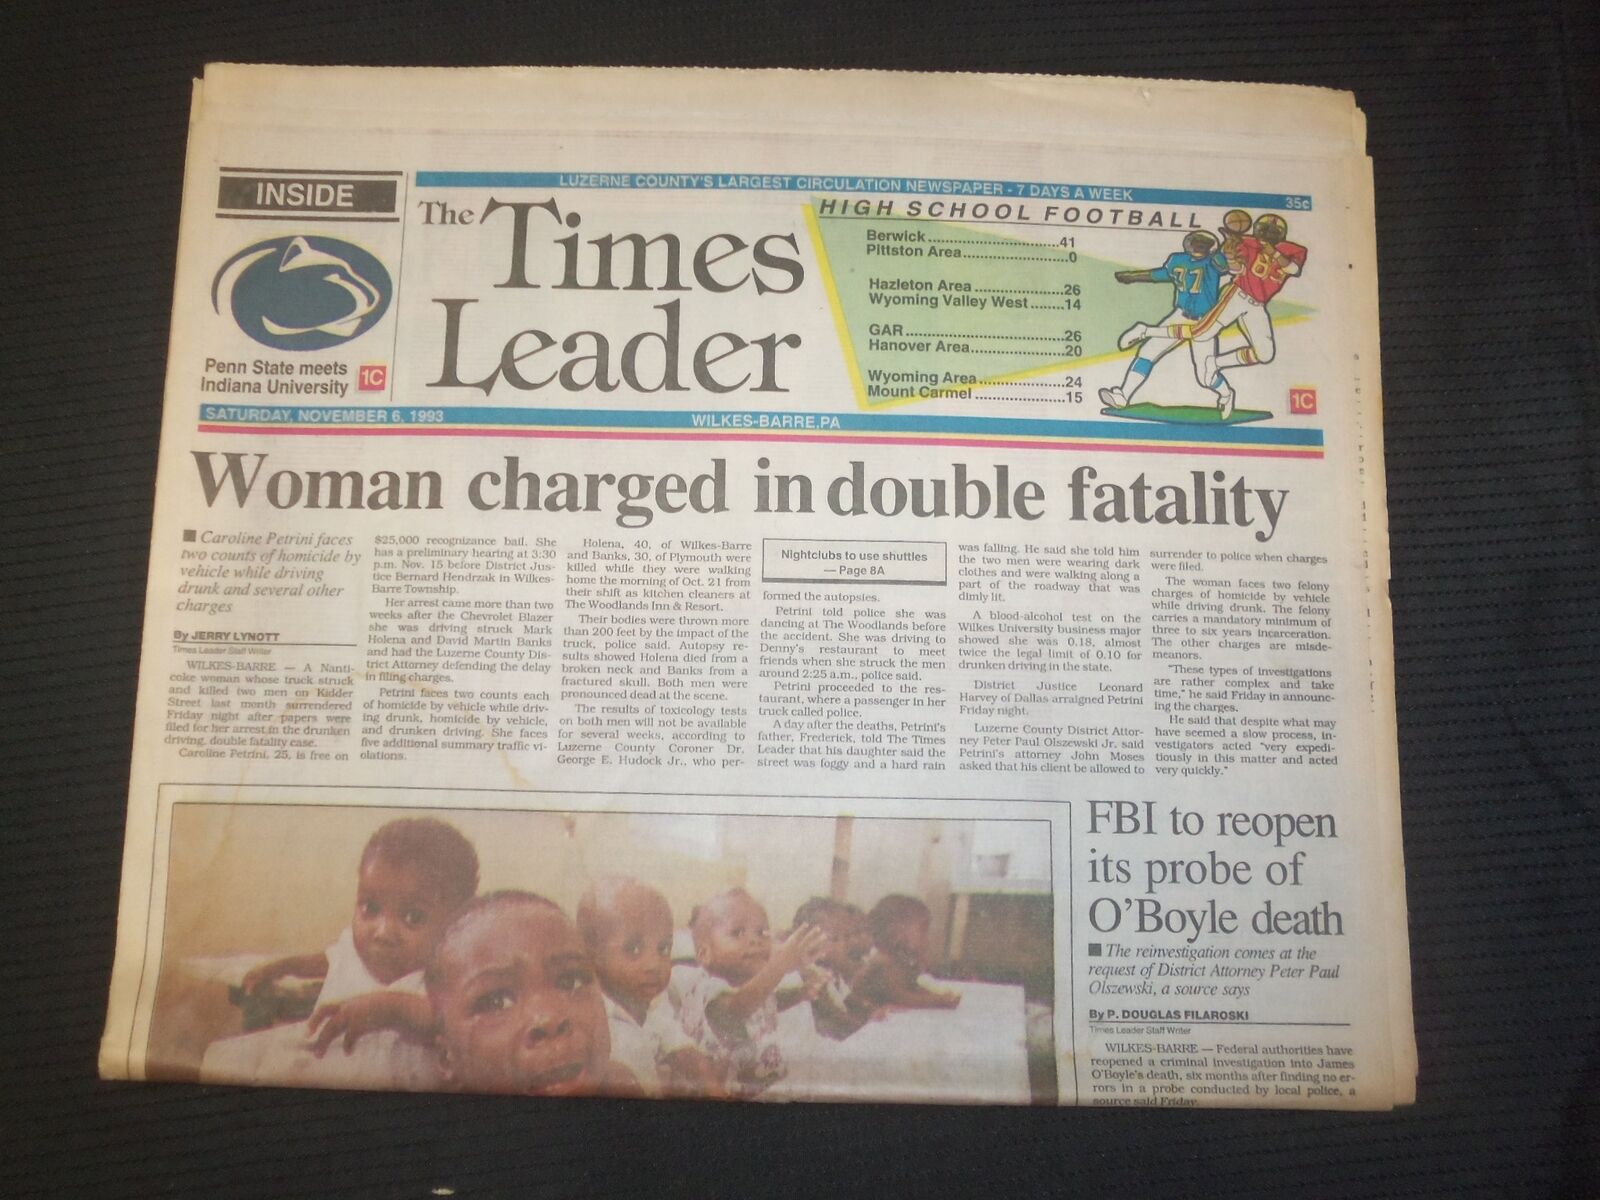 1993 NOV 6 WILKES-BARRE TIMES LEADER -WOMAN CHARGED IN DOUBLE FATALITY - NP 7559